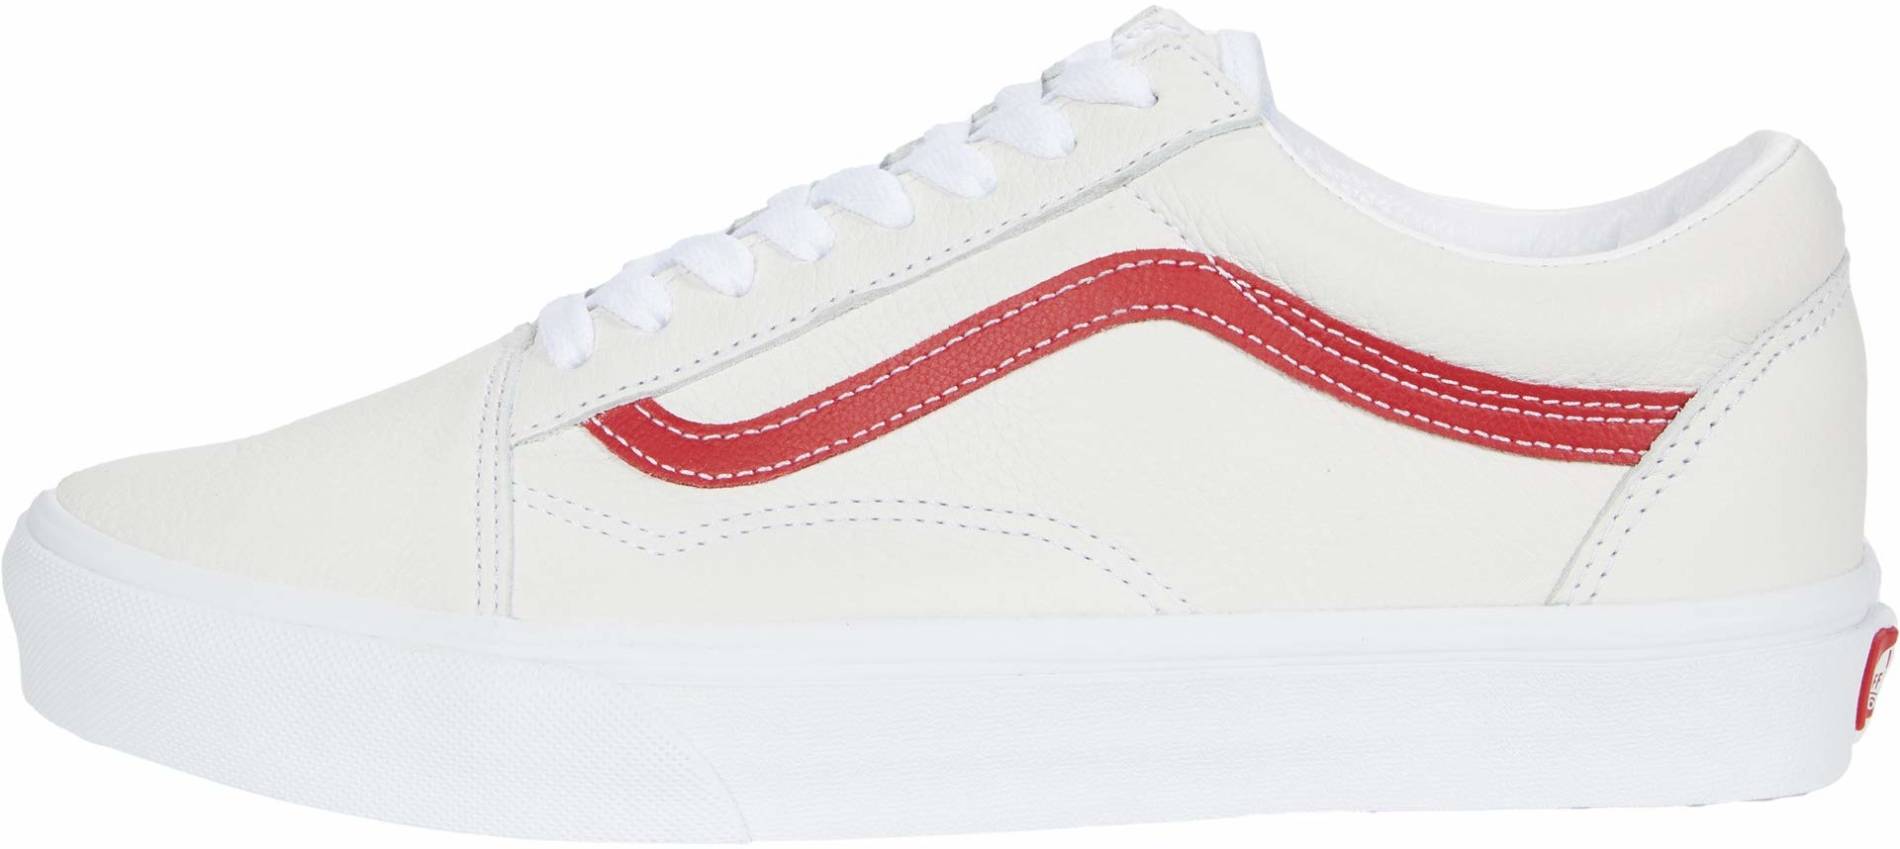 vans old skool white leather review